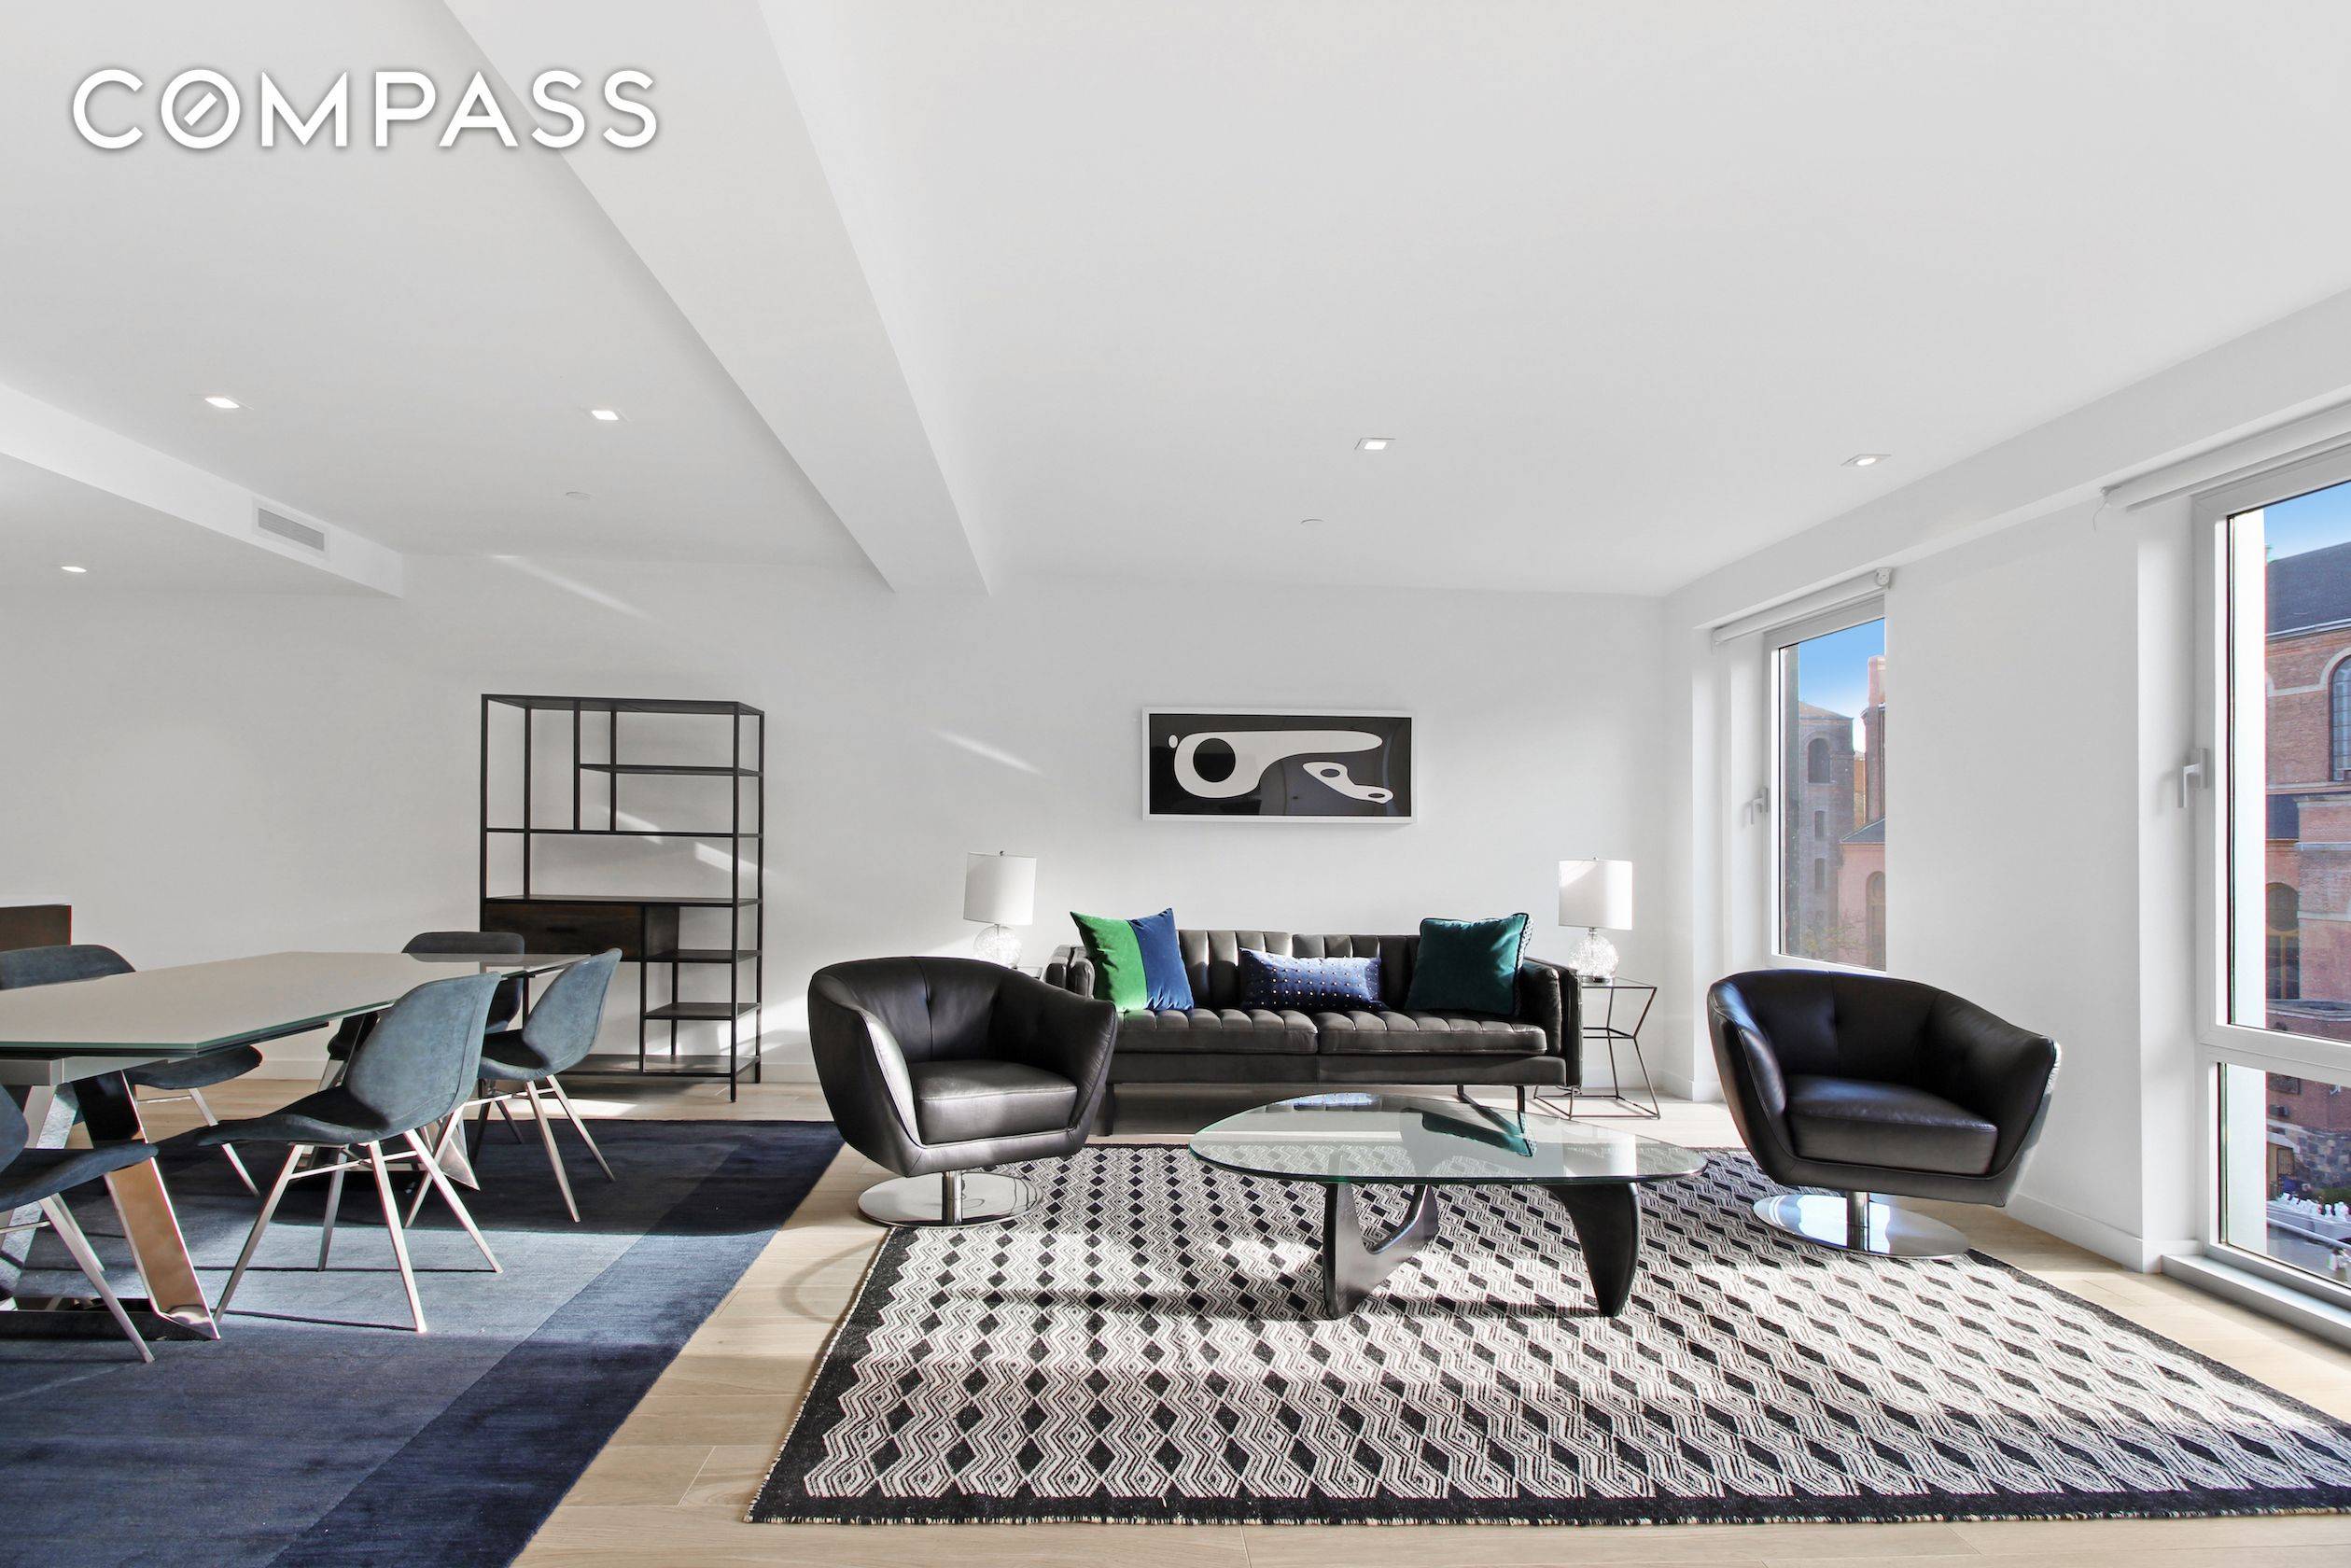 Welcome to your stunning full floor home in the most desirable neighborhood in New York City.